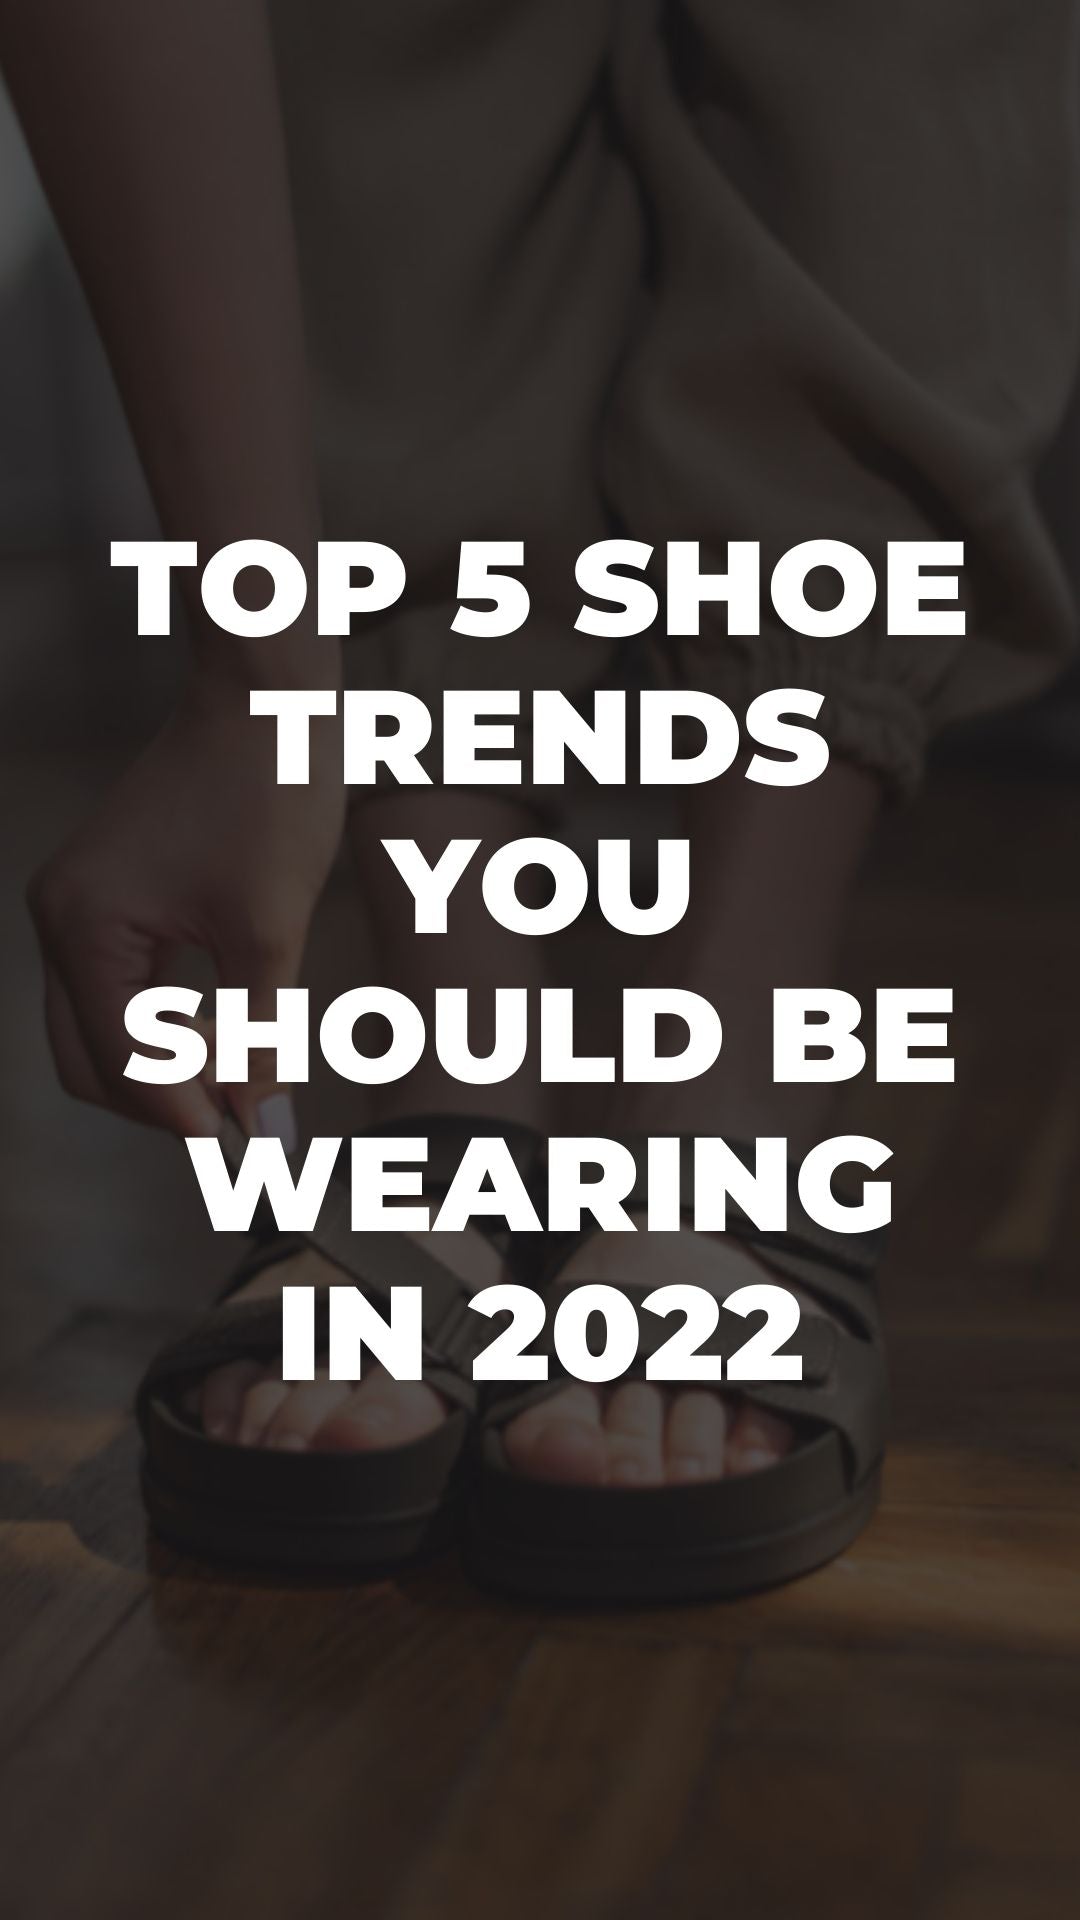 Top 5 Shoe Trends You Should Be Wearing In 2022